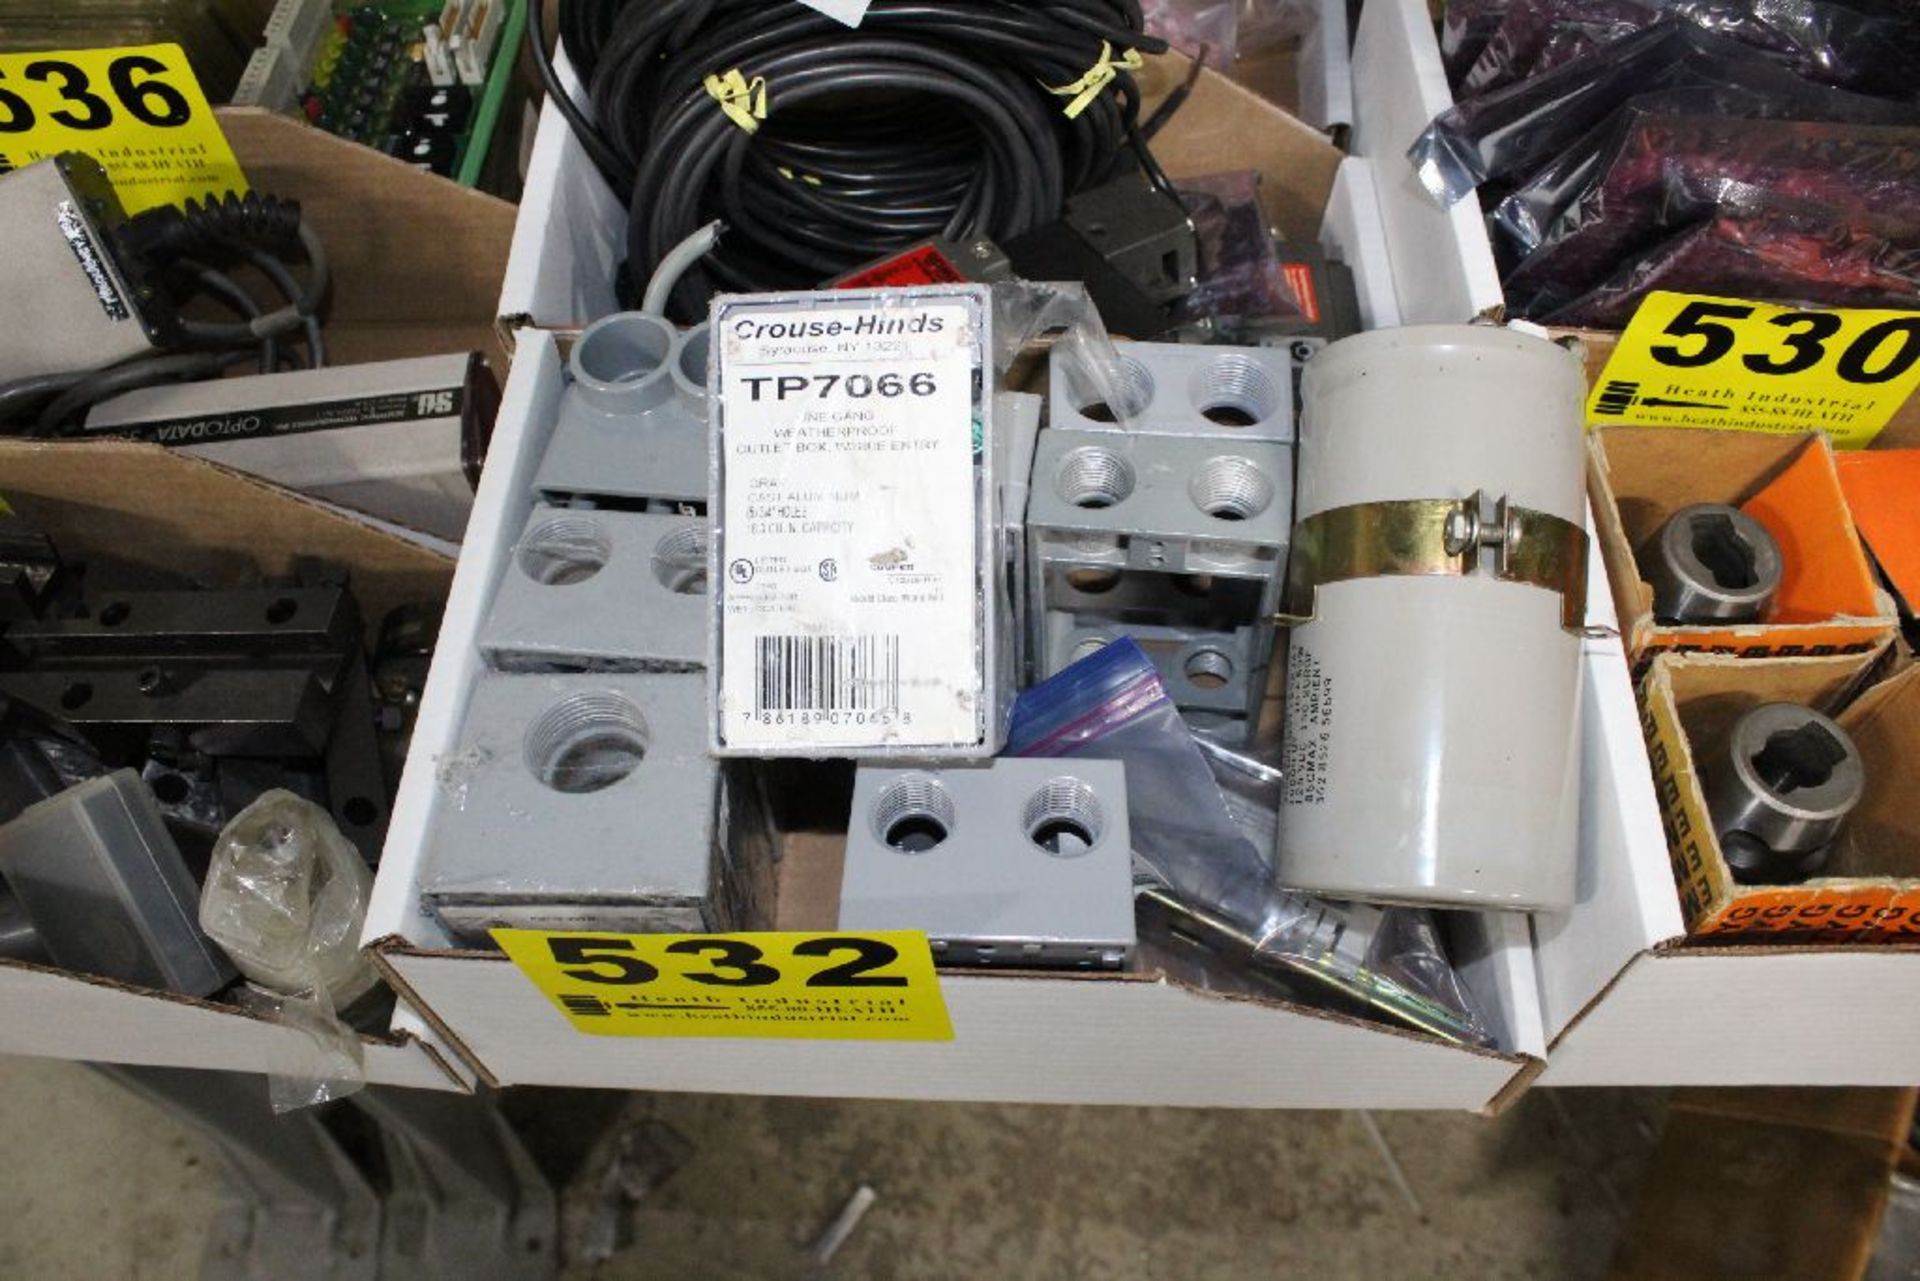 CROUSE-HINDS WEATHERPROOF OUTLET BOXES AND TRANSFORMER IN BOX